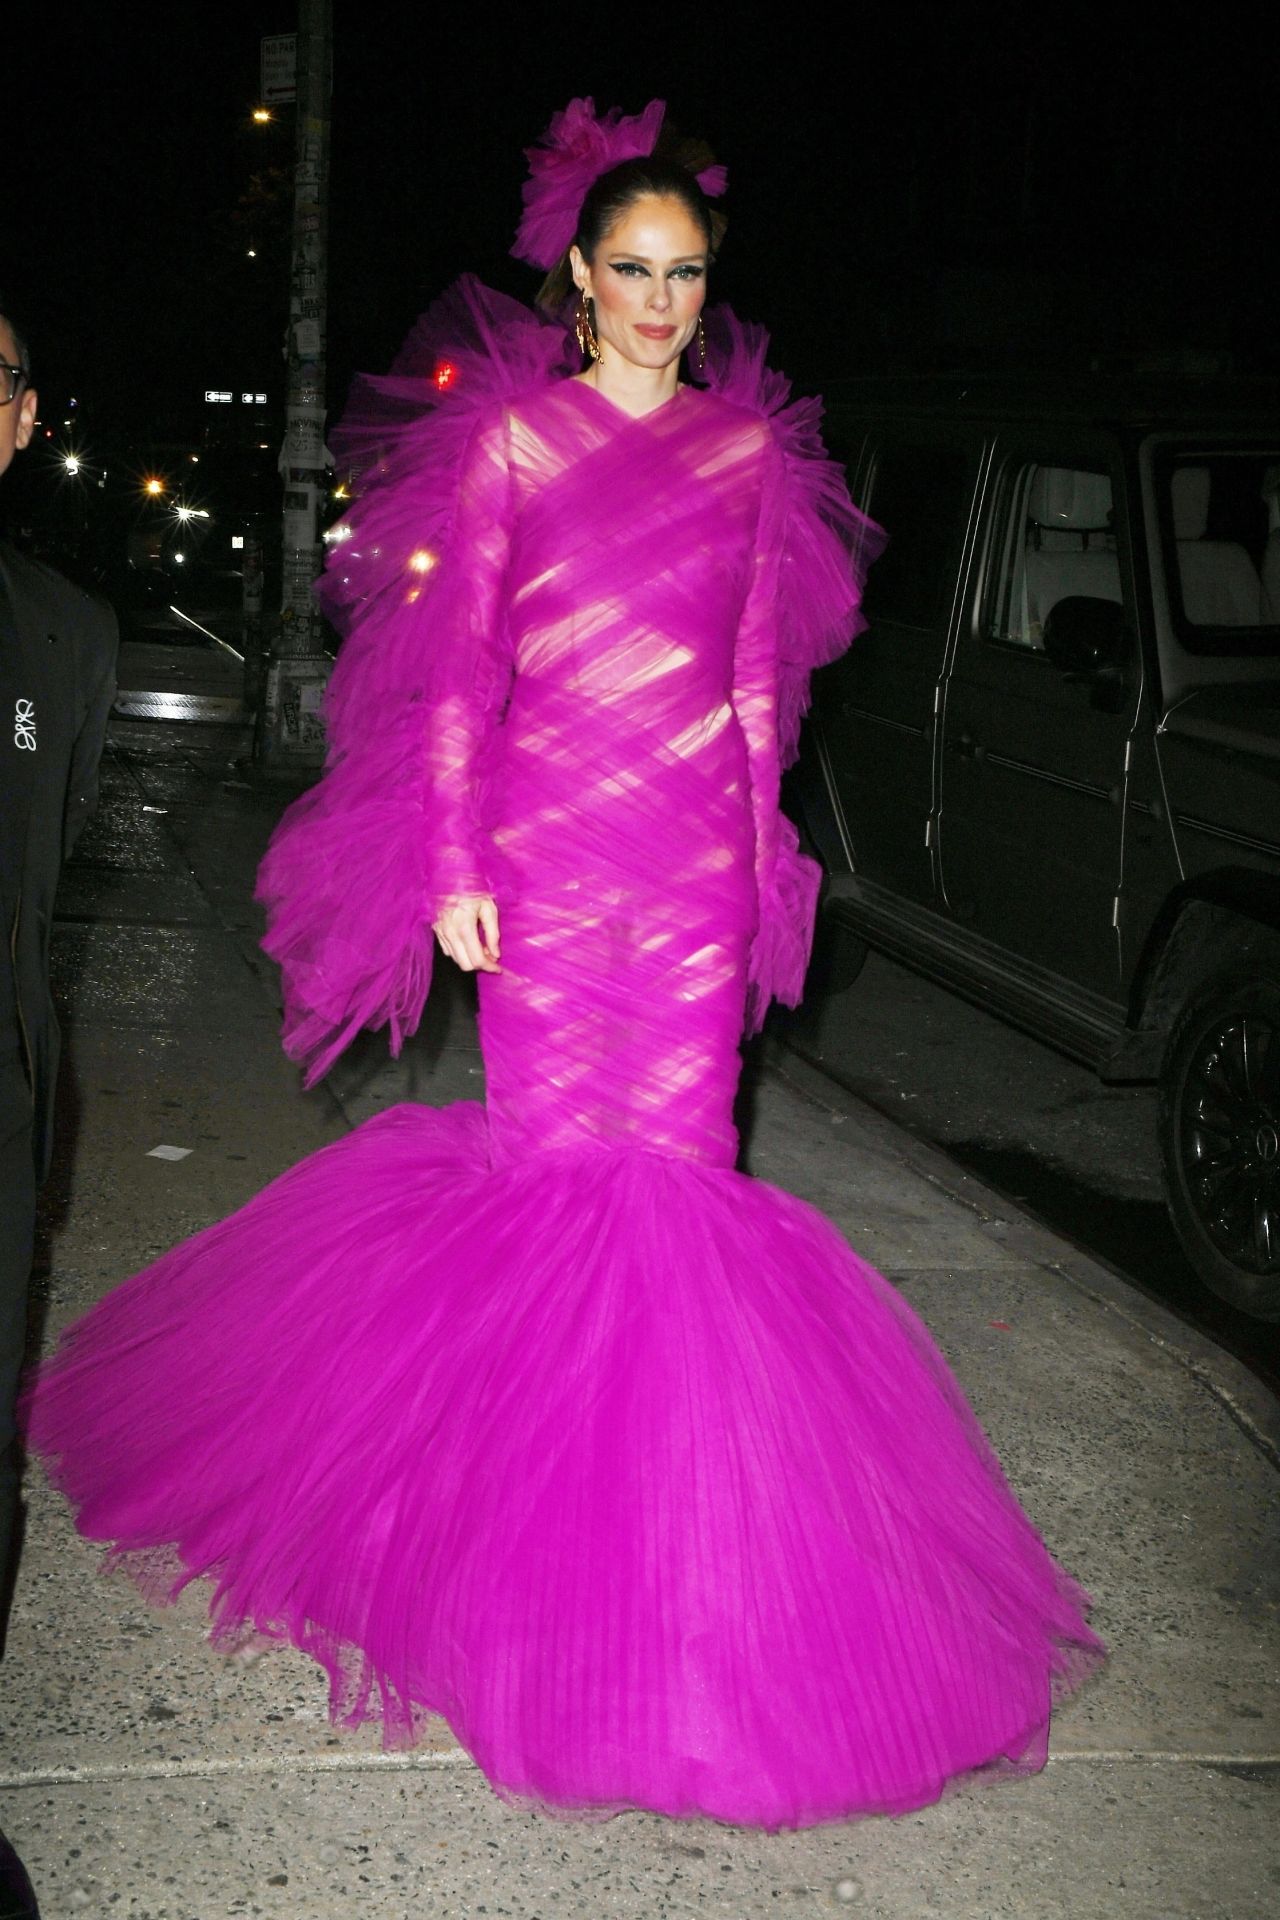 COCO ROCHA AT THE THE MULBERRY BAR FOR A MET GALA AFTER PARTY IN NEW YORK